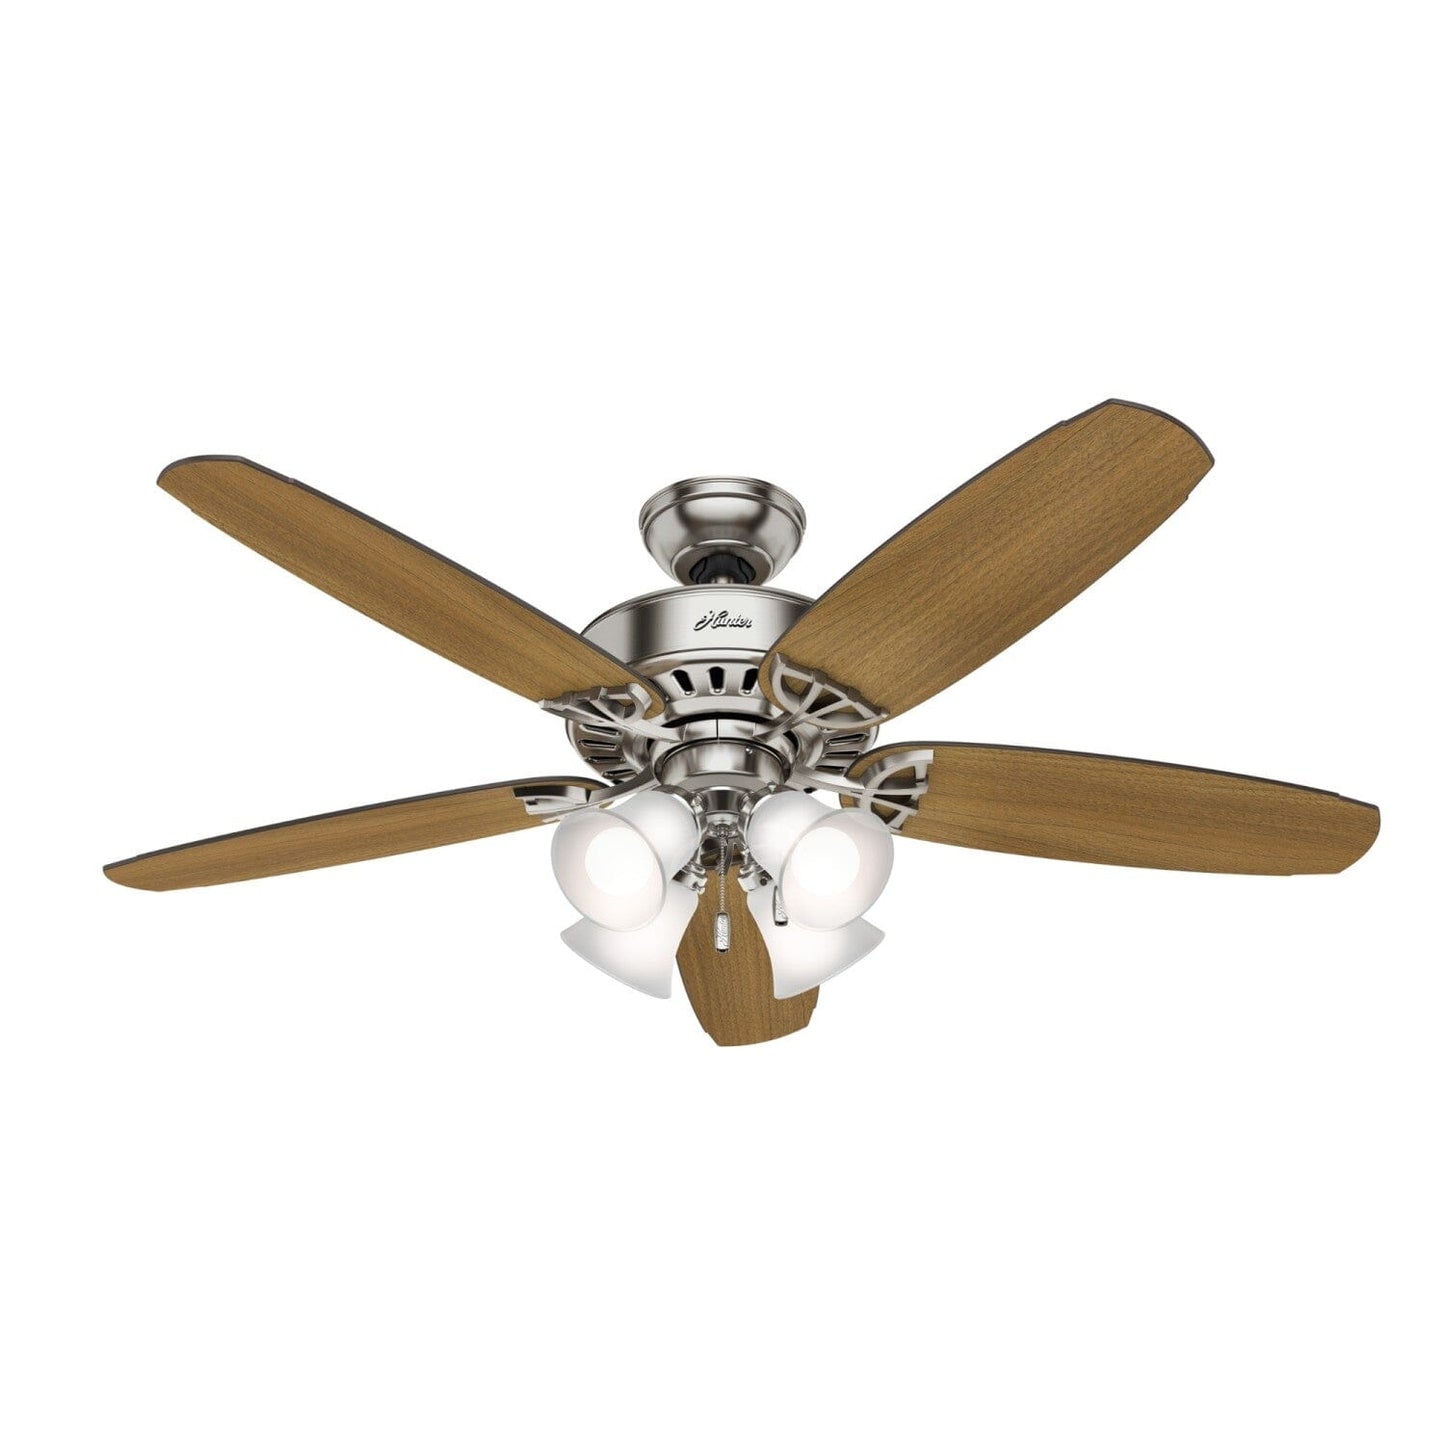 Allendale with 4 LED Lights 52 inch Ceiling Fans Hunter Brushed Nickel - American Walnut 